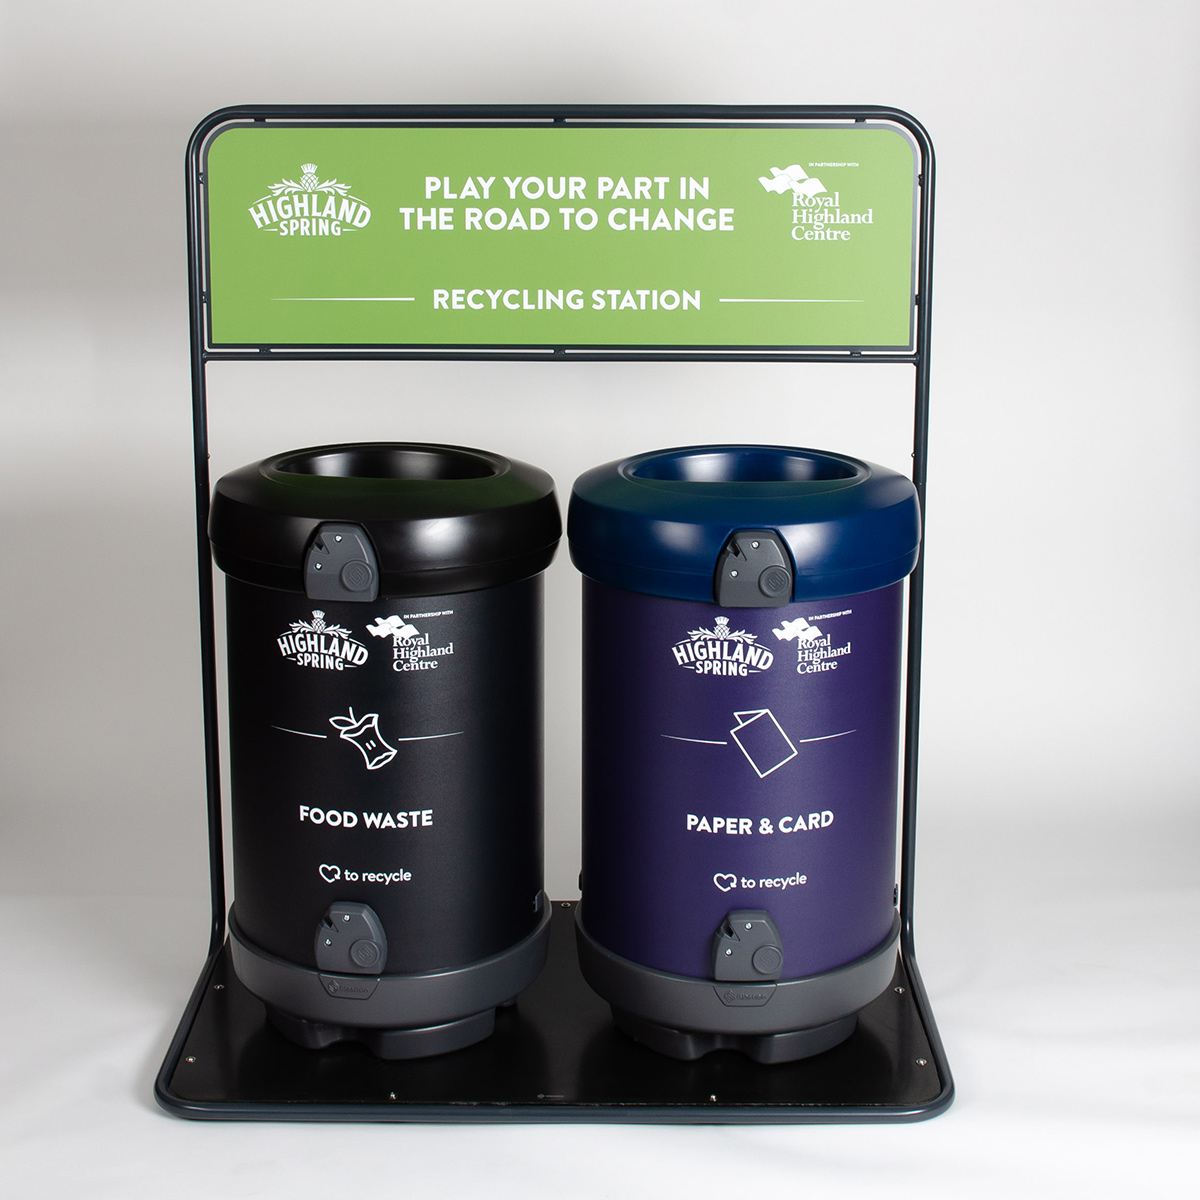 C-Thru™ 180 Recycling bins with personalised bin body and recycling stand graphic